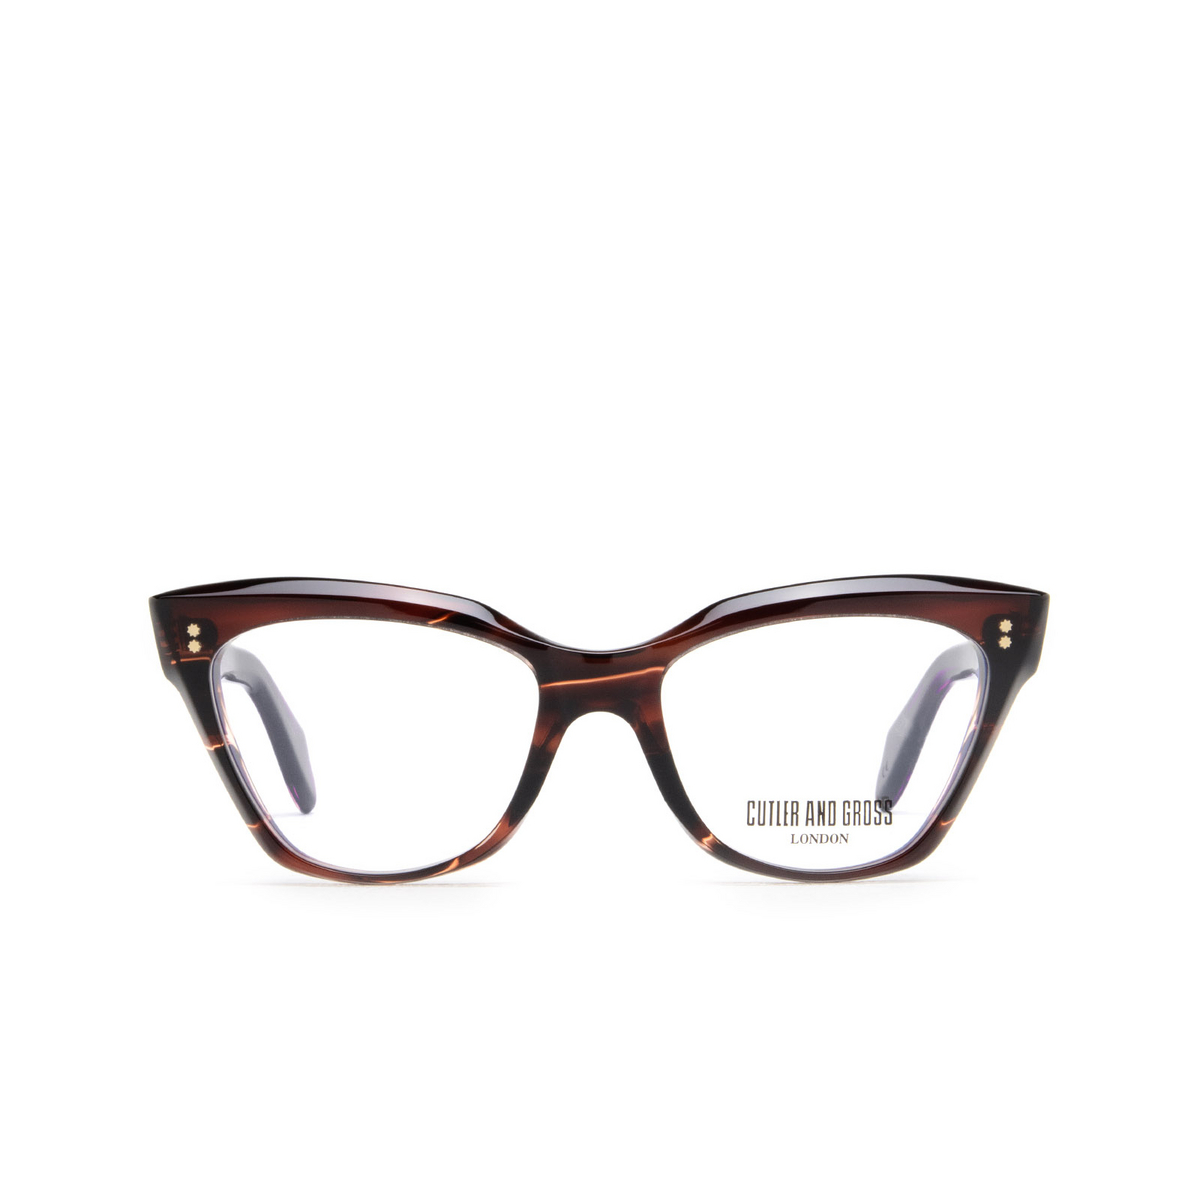 Cutler and Gross 9288 Eyeglasses 02 Striped Brown Havana - front view